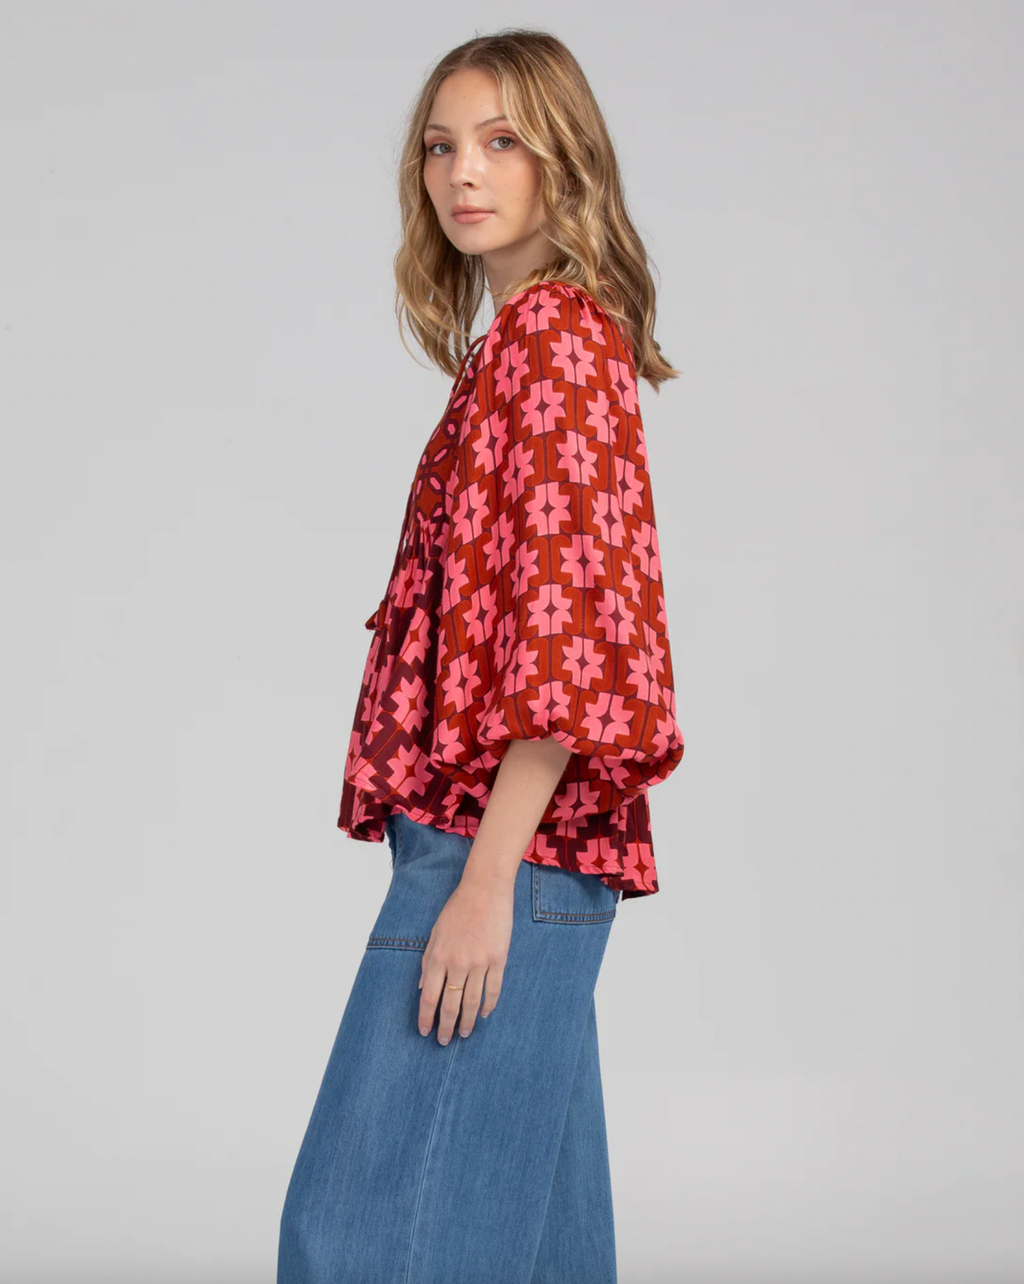 The noel top by boom shankar is a peasant style boho blouse with a pink and red retro geometric pattern and ballon sleeves